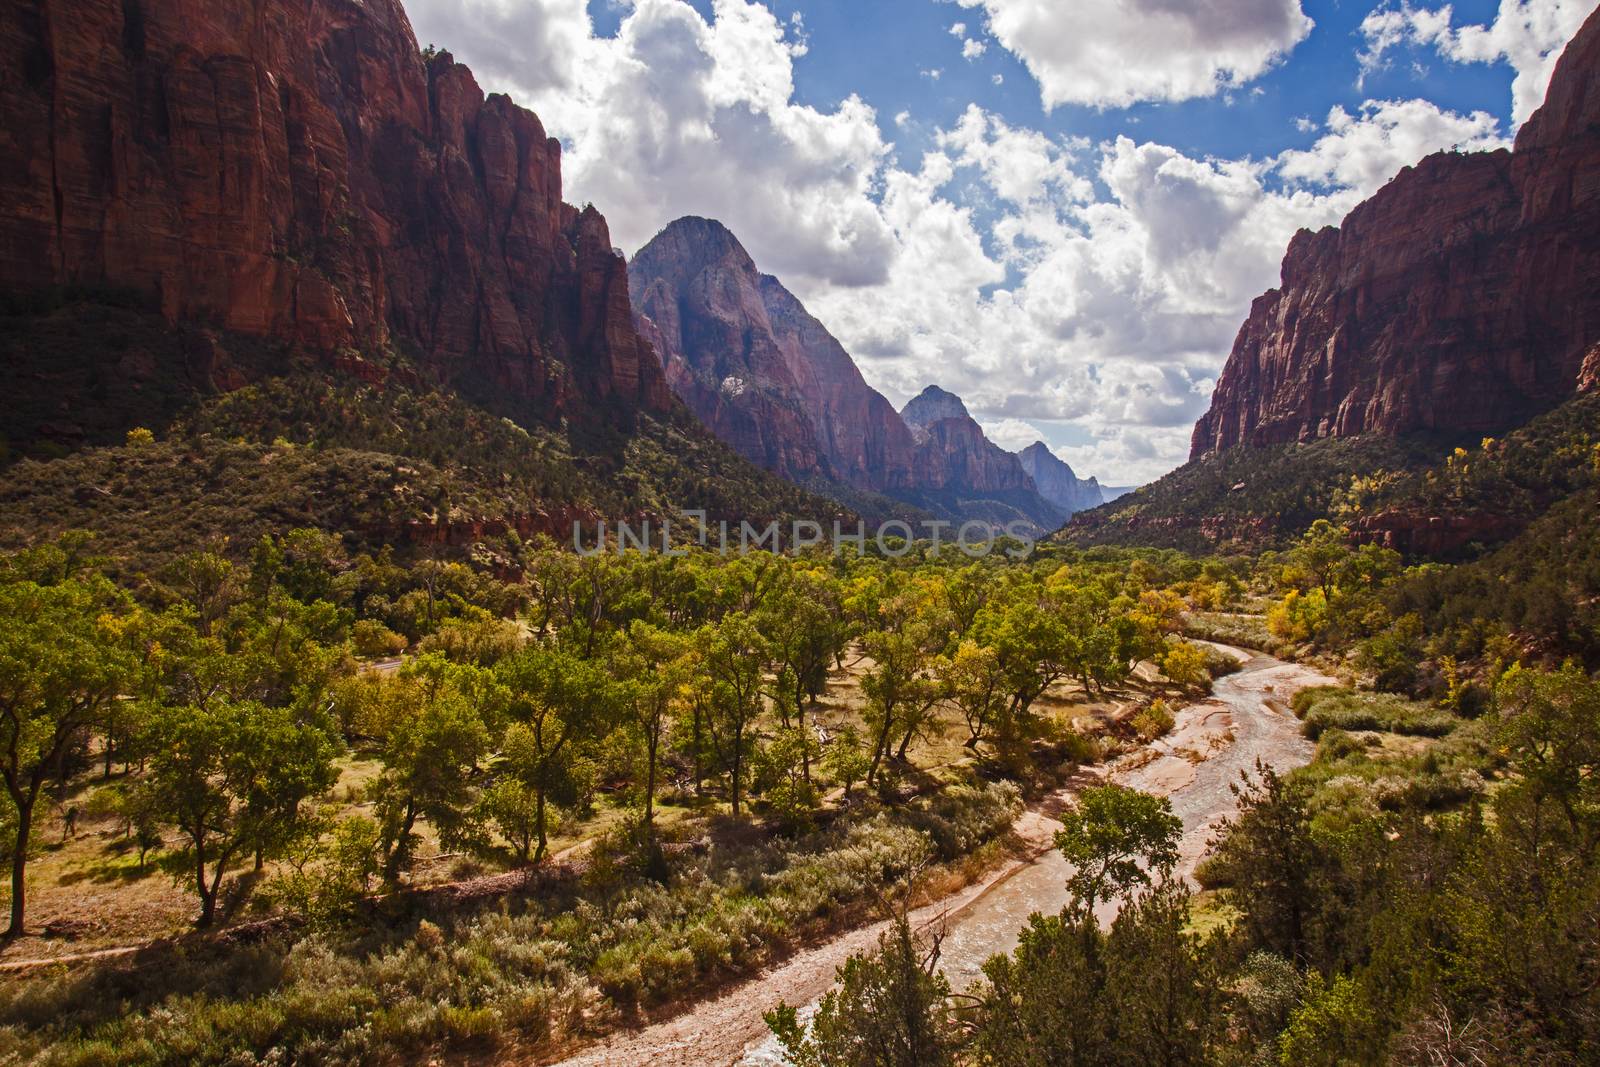 Zion National Park. 2670 by kobus_peche